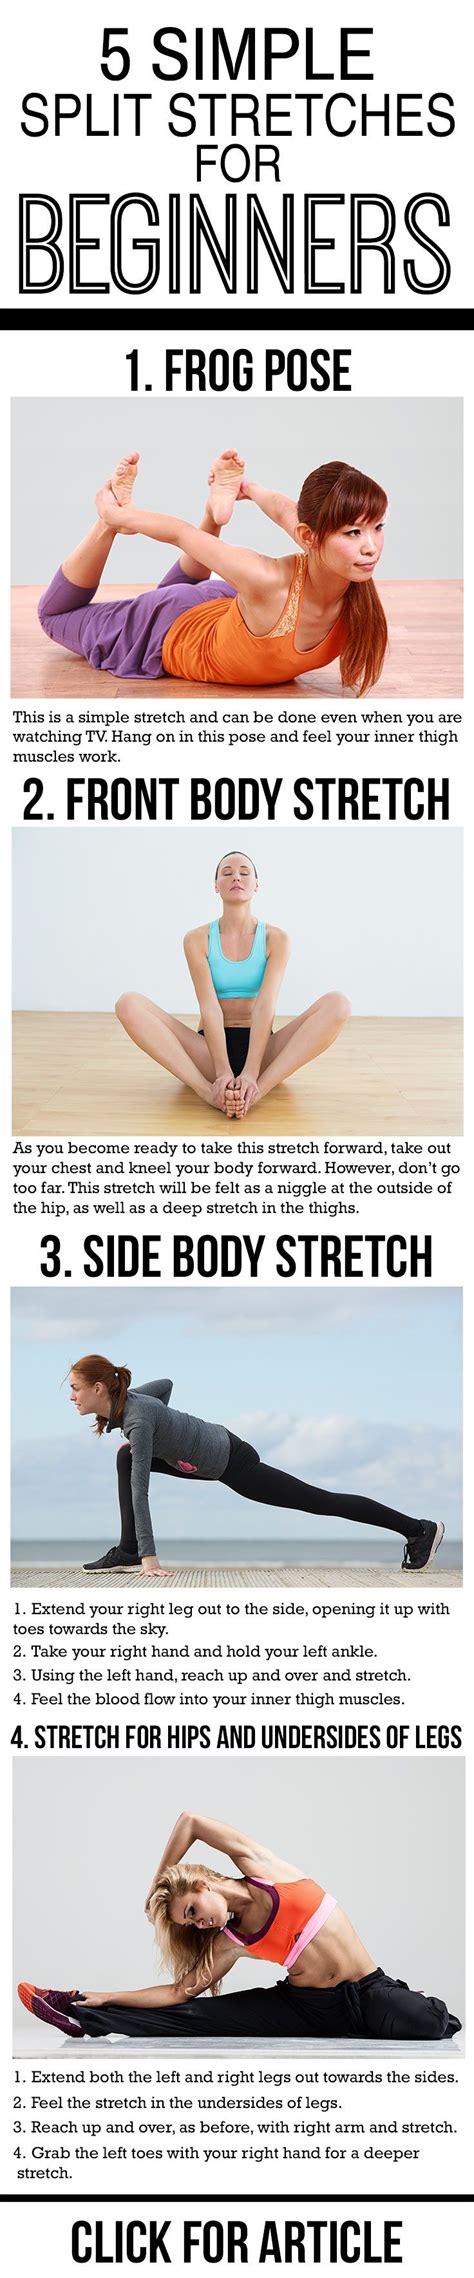 5 Simple Split Stretches For Beginners Want To Know More About This